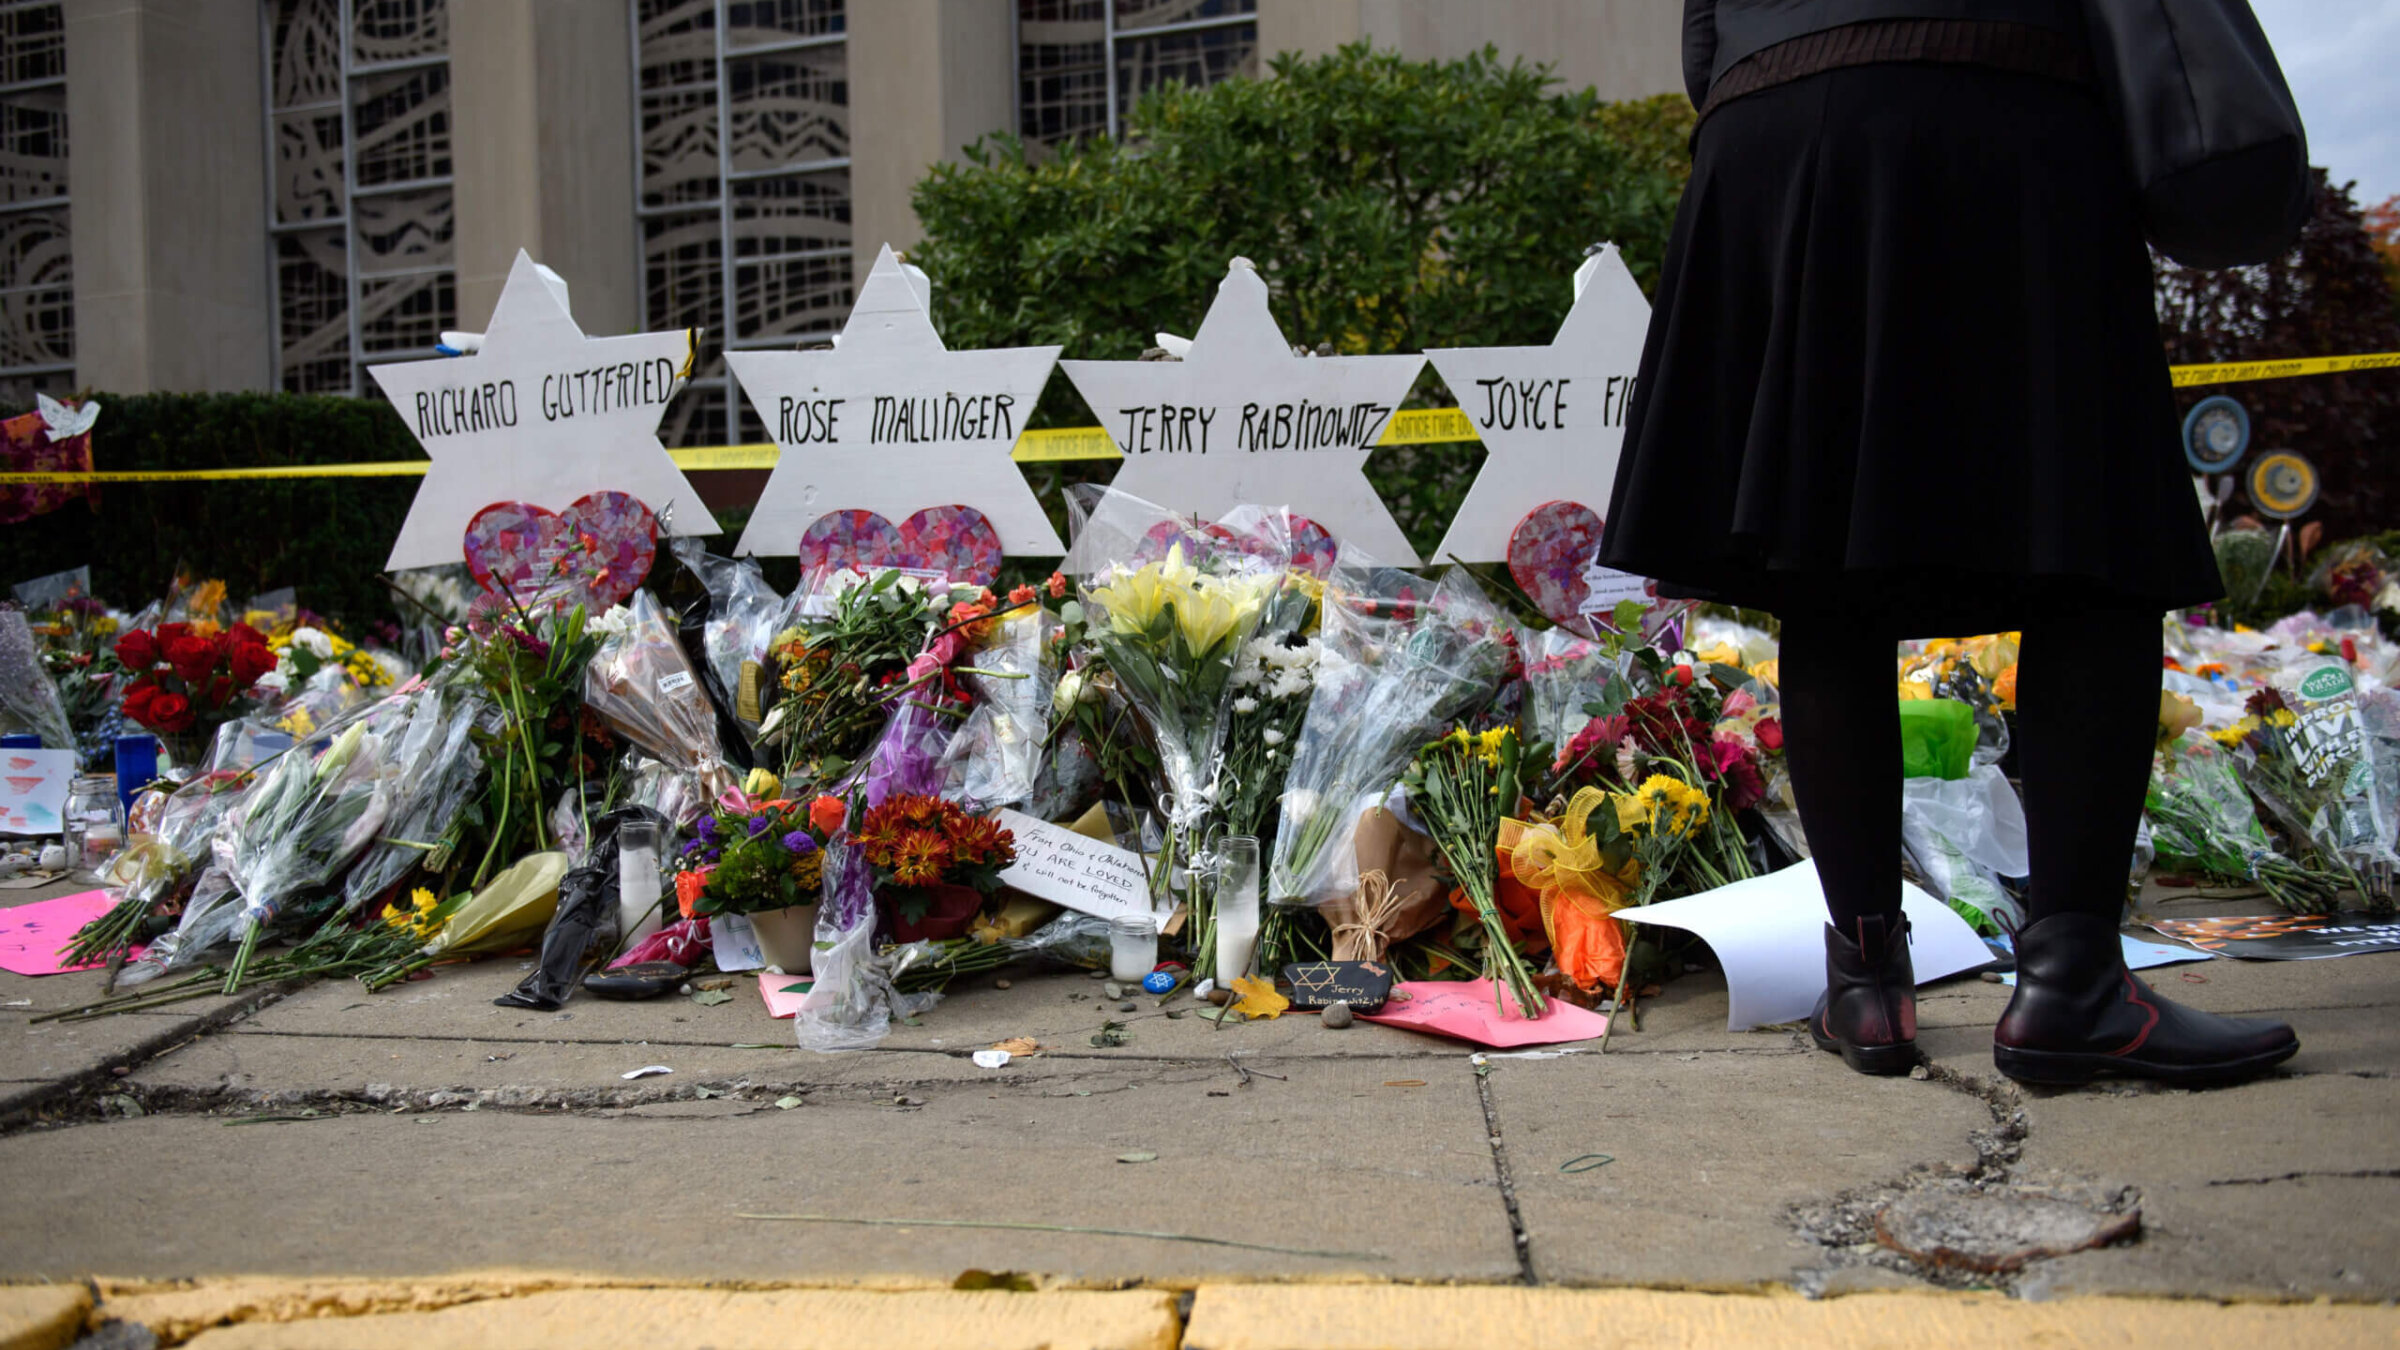 Mourners visit the memorial outside the Tree of Life Synagogue on October 31, 2018, in Pittsburgh, Pennsylvania, where eleven Jews were killed in a mass shooting.